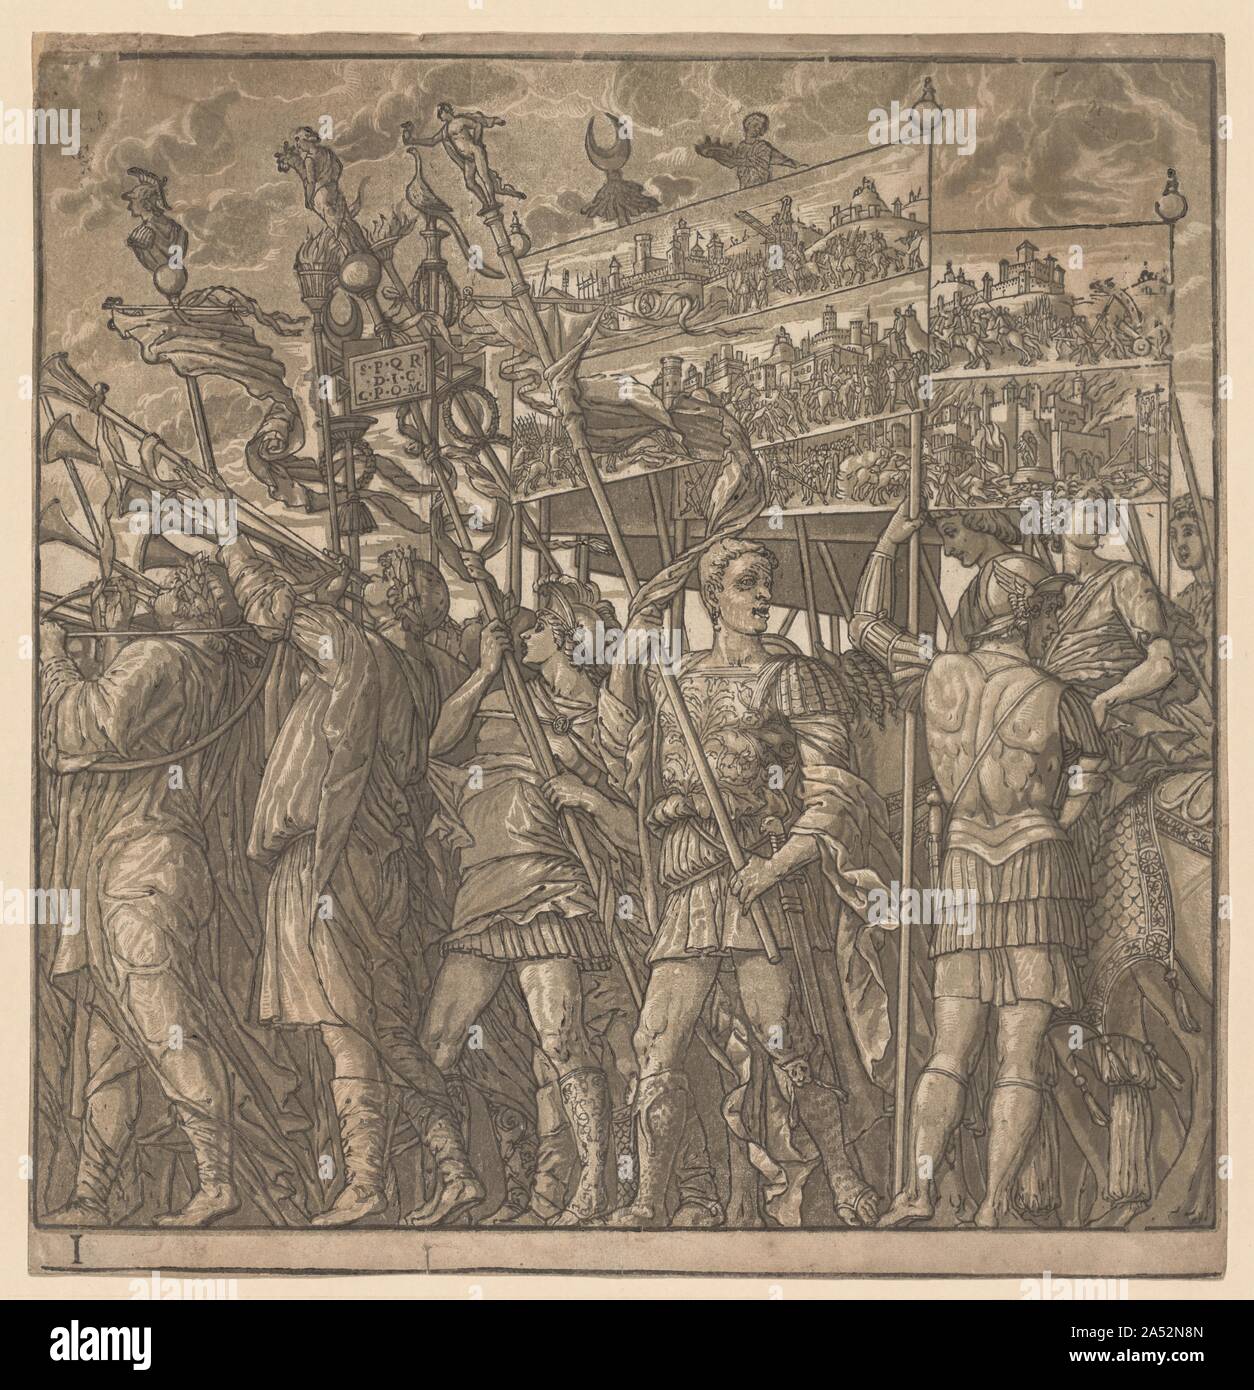 The Triumph of Julius Caesar: Soldiers Carrying the Pictures of War, 1593-99. Commissioned by Duke Vincenzo Gonzaga, this series of chiaroscuro woodcuts reproduces Andrea Mantegna&#x2019;s  Triumph of Julius Caesar , painted a century earlier. The scenes imaginatively portray the triumphal procession of the renowned Roman general and consul Julius Caesar following his successful defeat of Gaul in 52 BC. Each section of the continuous frieze shows elements typical of these parades, sanctioned by the Roman Senate and described in ancient texts. The printed suite&#x2019;s frontispiece features a Stock Photo